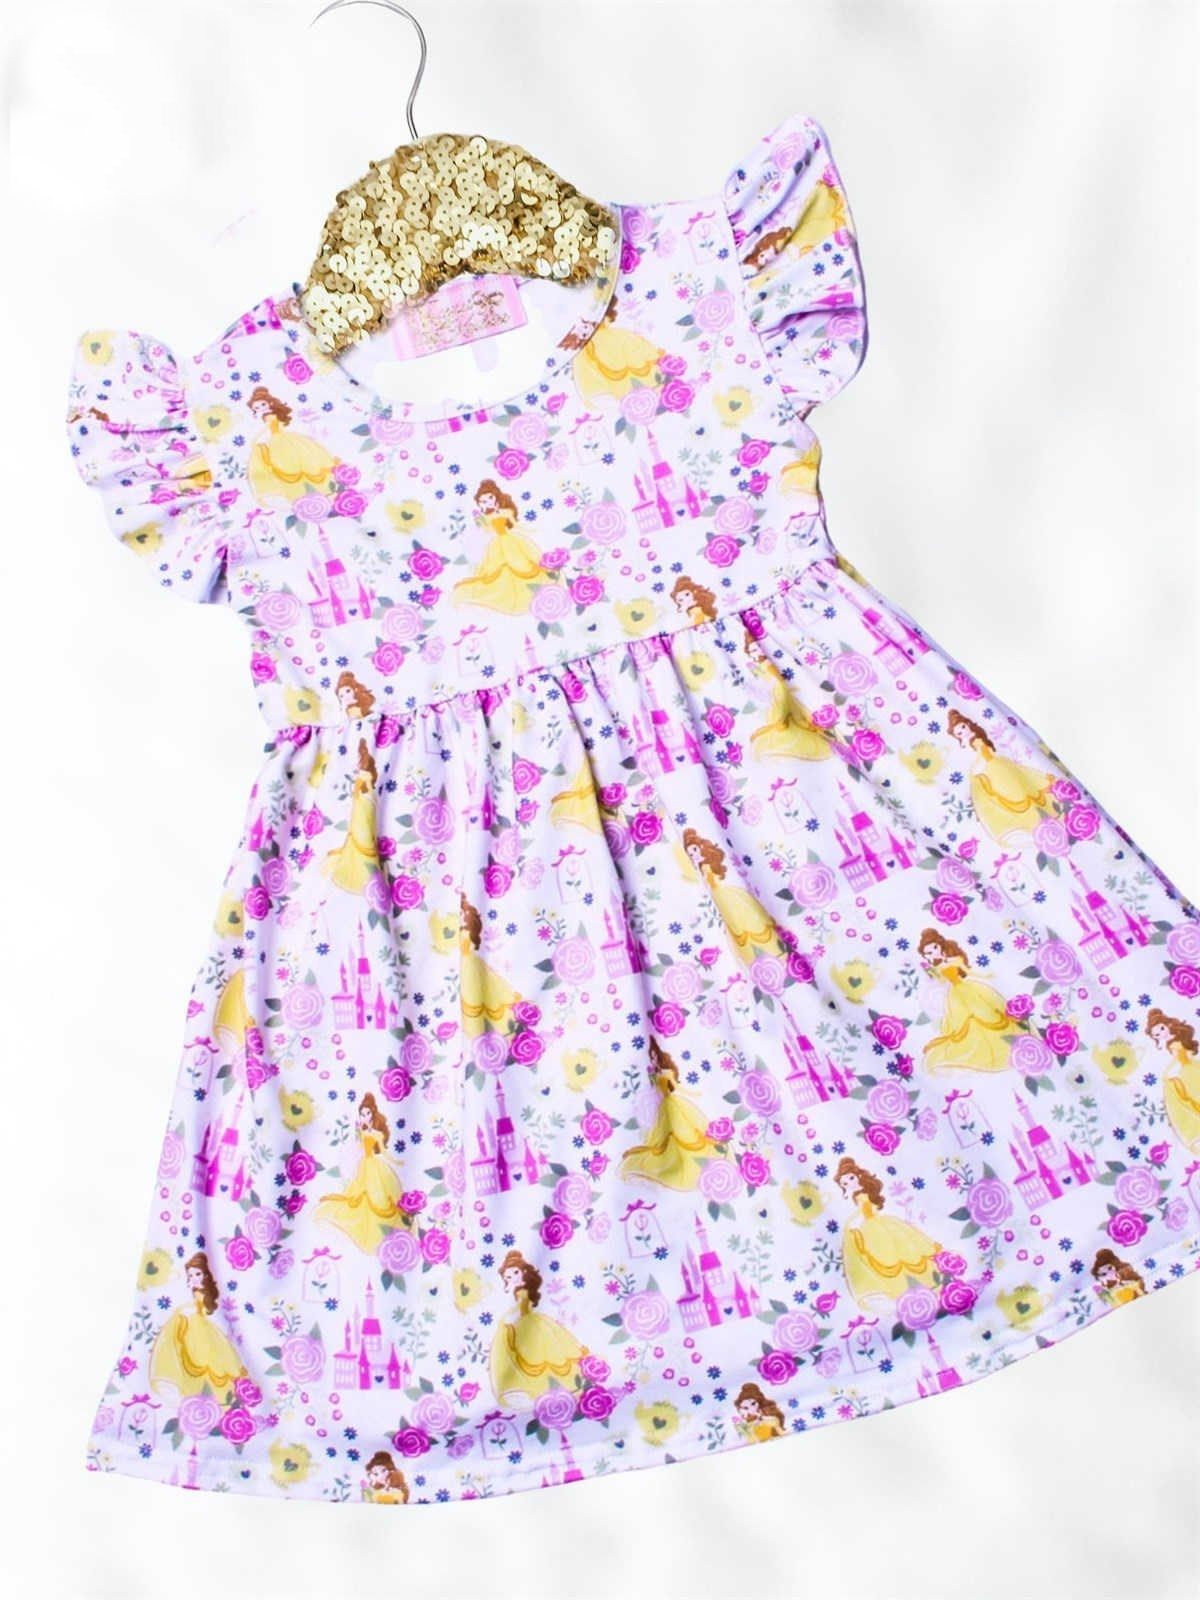 Girls Fun Character Dresses - Yellow Belle - pink castles & roses